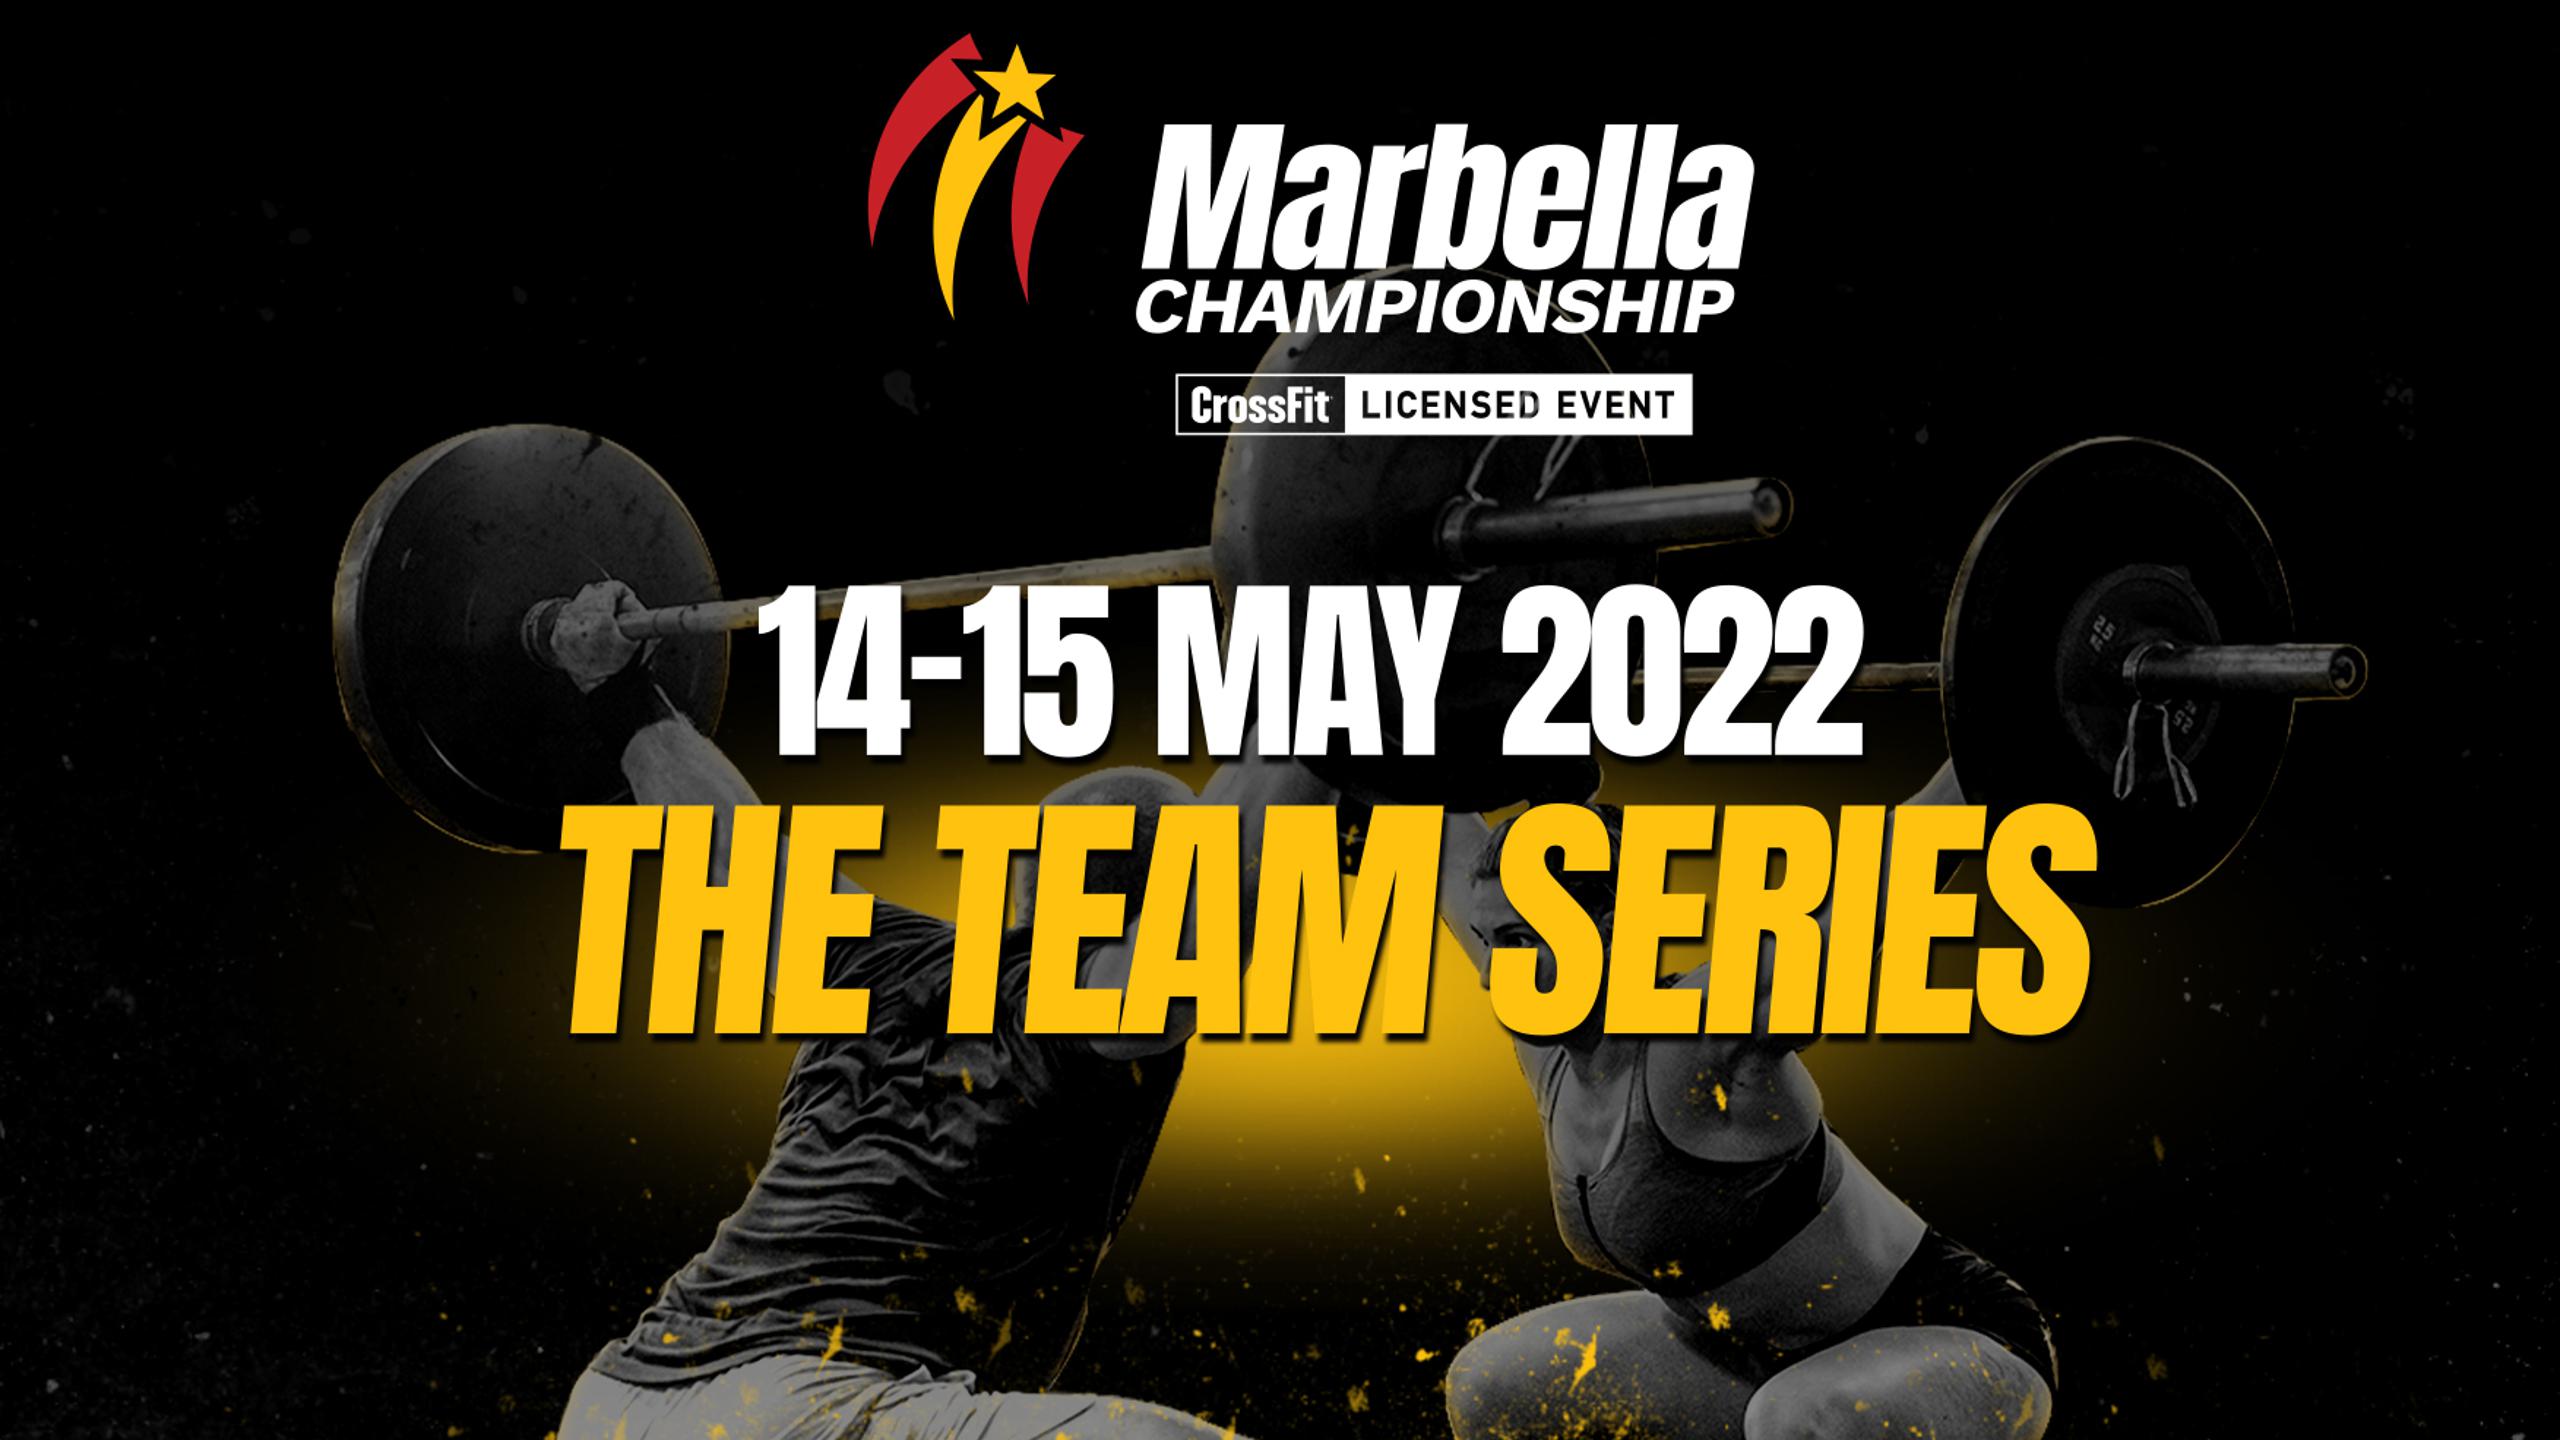 MARBELLA CHAMPIONSHIP. Tickets, lineup, bands for MARBELLA CHAMPIONSHIP